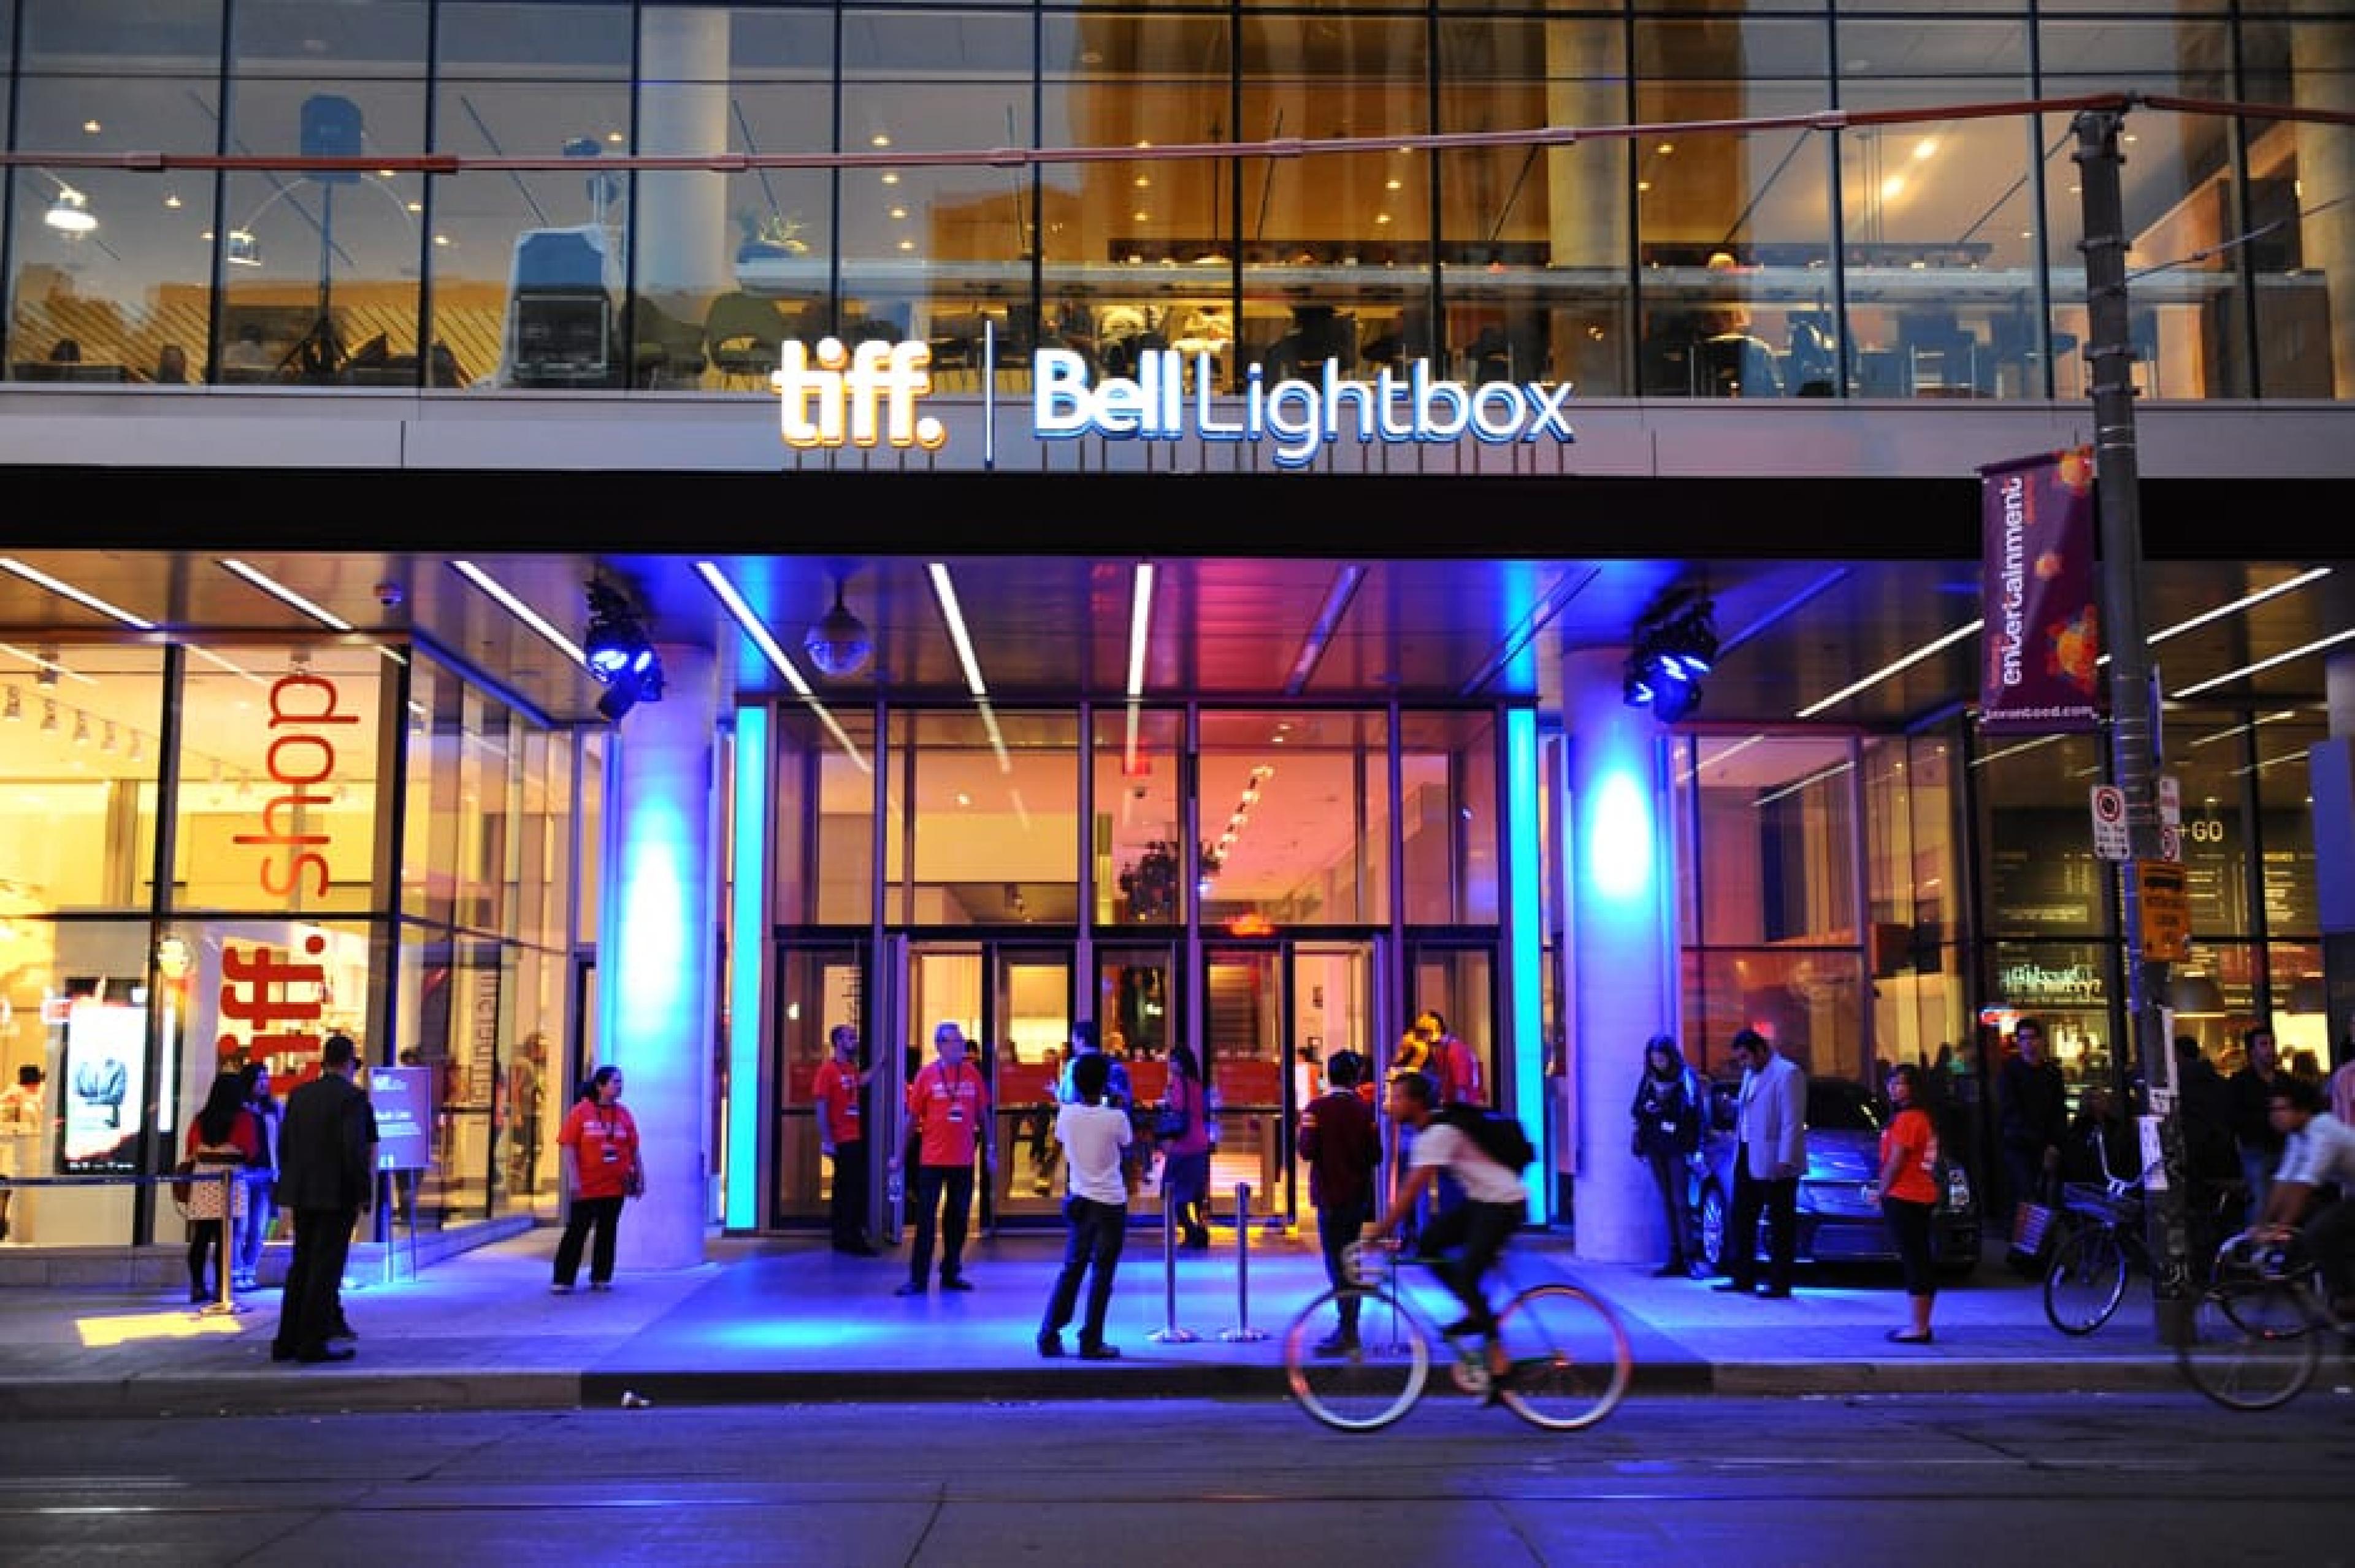 Exterior View - TIFF Bell Lightbox,Toronto, Canada - Courtesy Charles Leonio, Wire Image Getty for TIFF